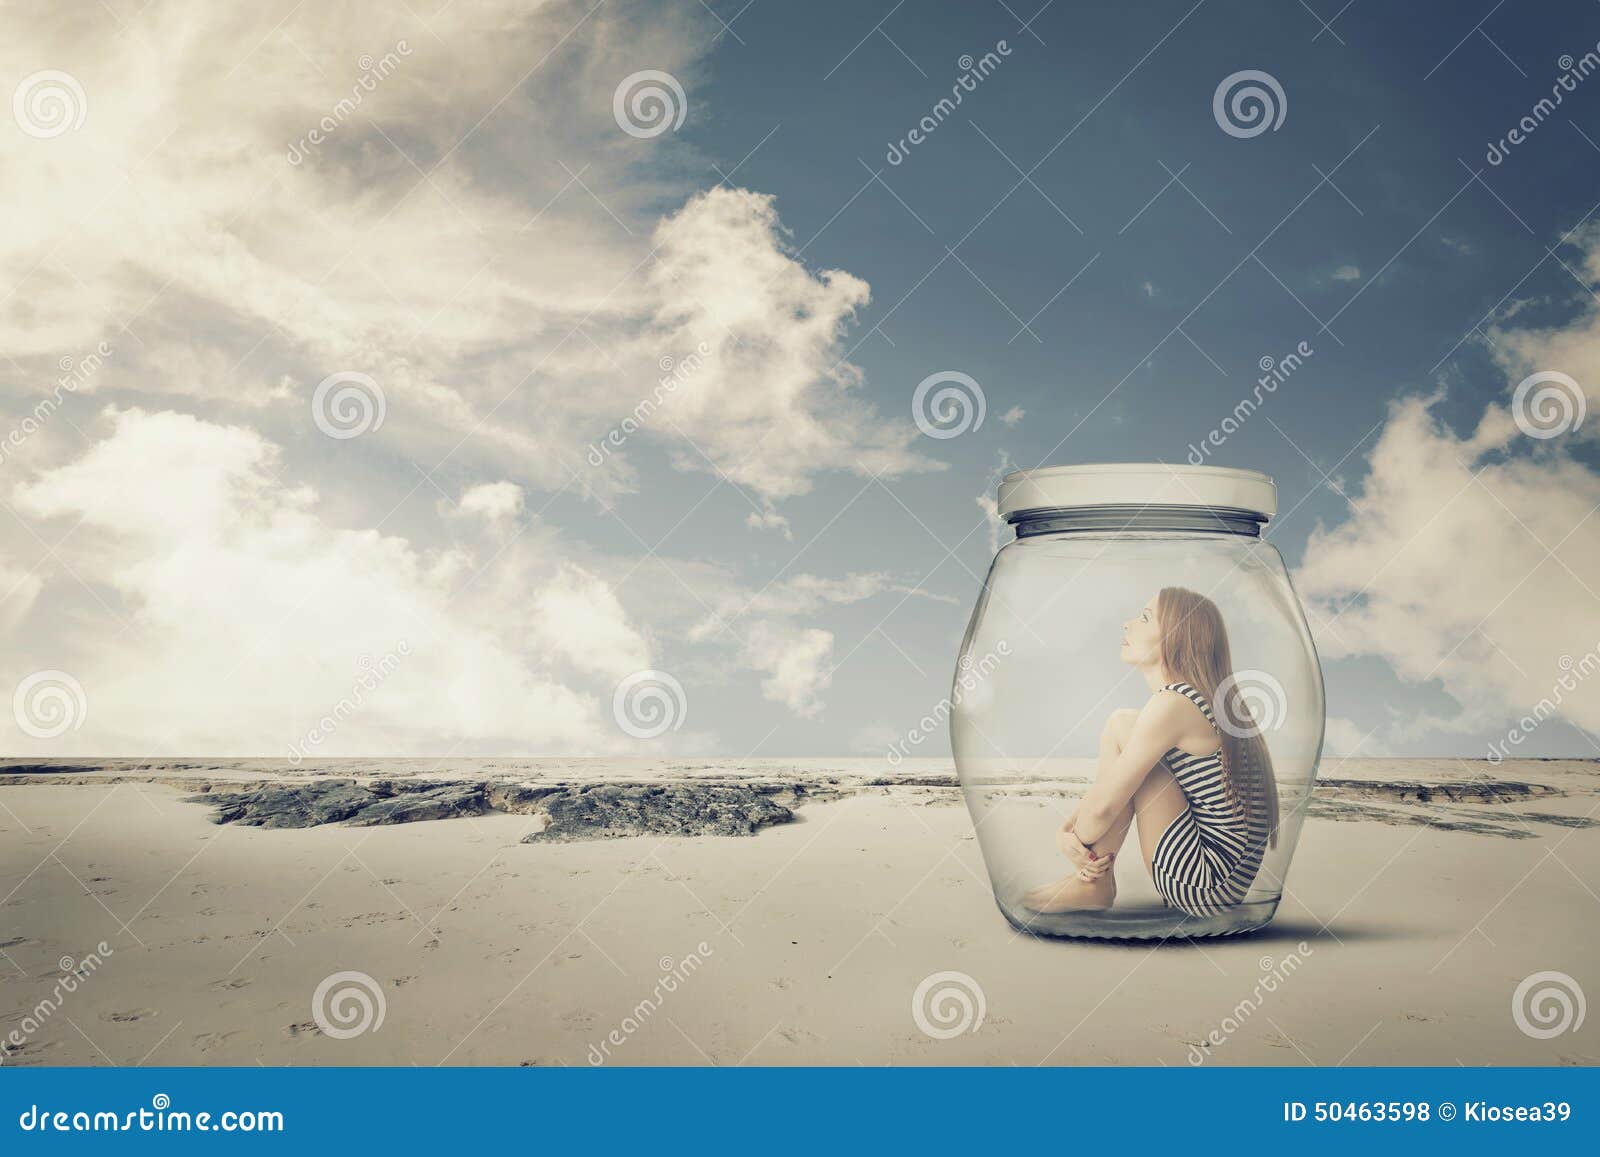 young woman sitting in a jar in the desert. loneliness outlier concept